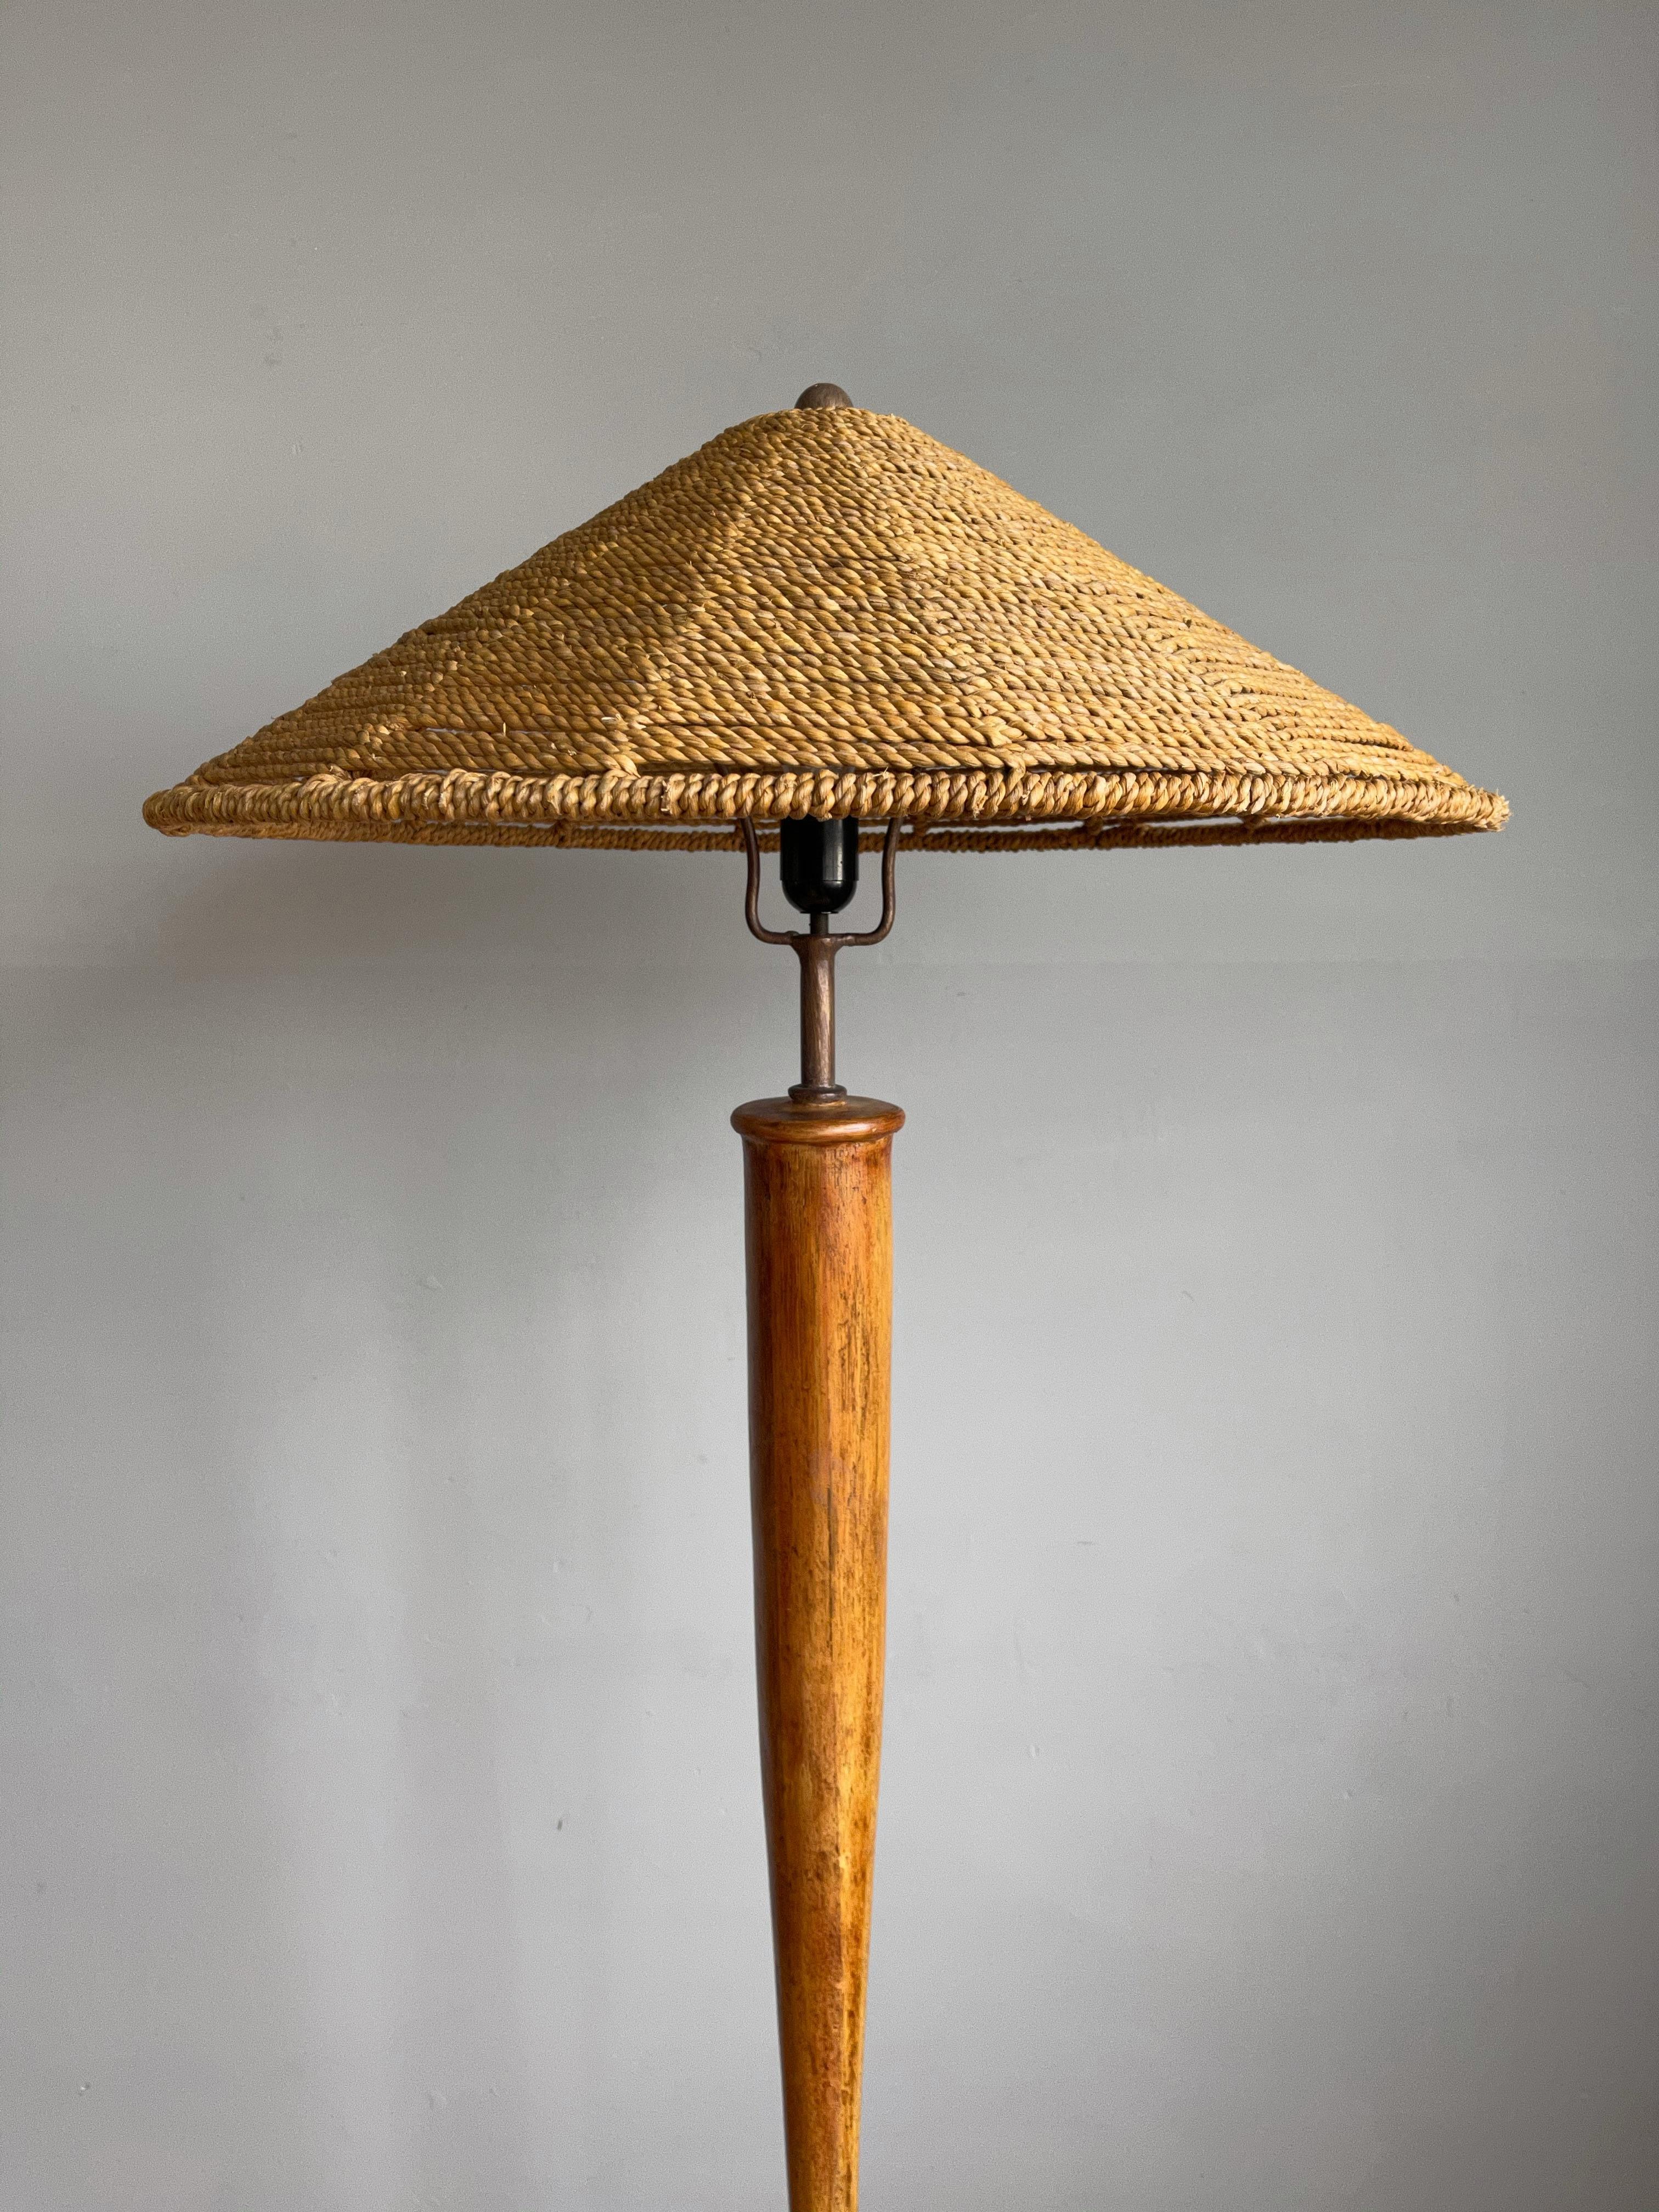 Stunning, organic design floor lamp, fixture with an oriental look and feel.

This rare and handcrafted design lamp from the mid-century era is another one of our recent, special finds. We have never seen such an interesting and stylish floor lamp